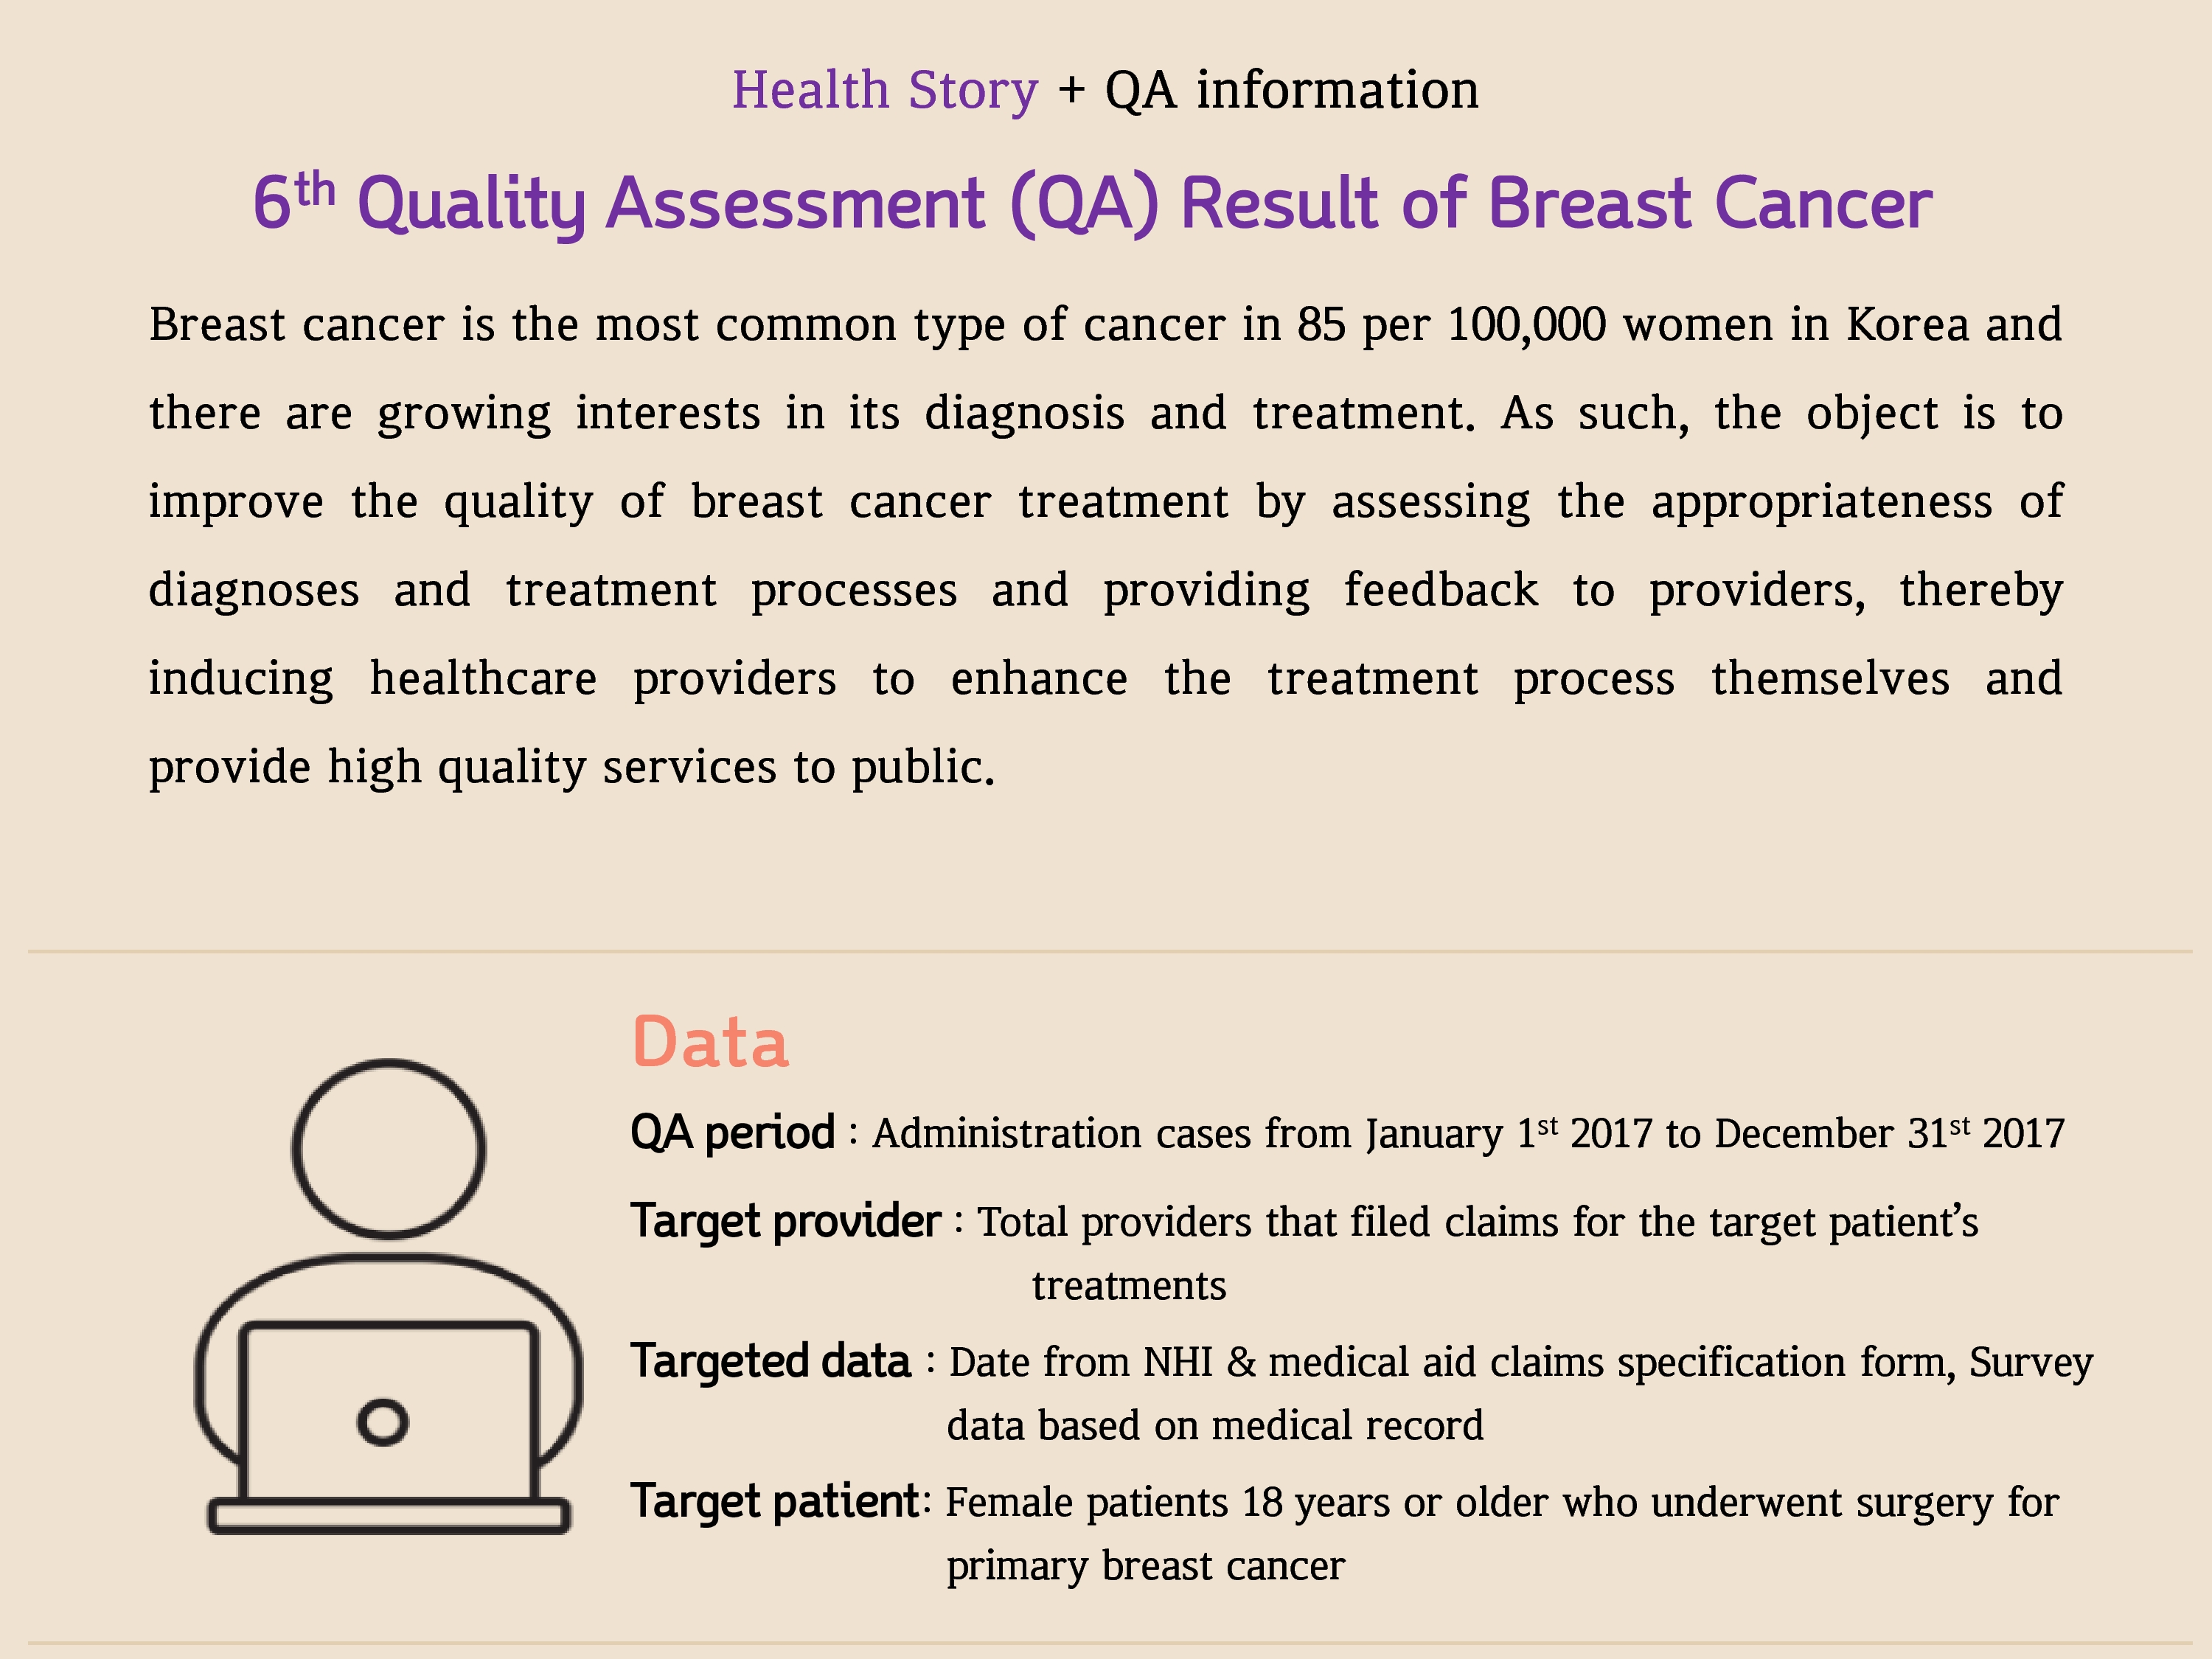 [Health Story] 6th QA Result of Breast Cancer